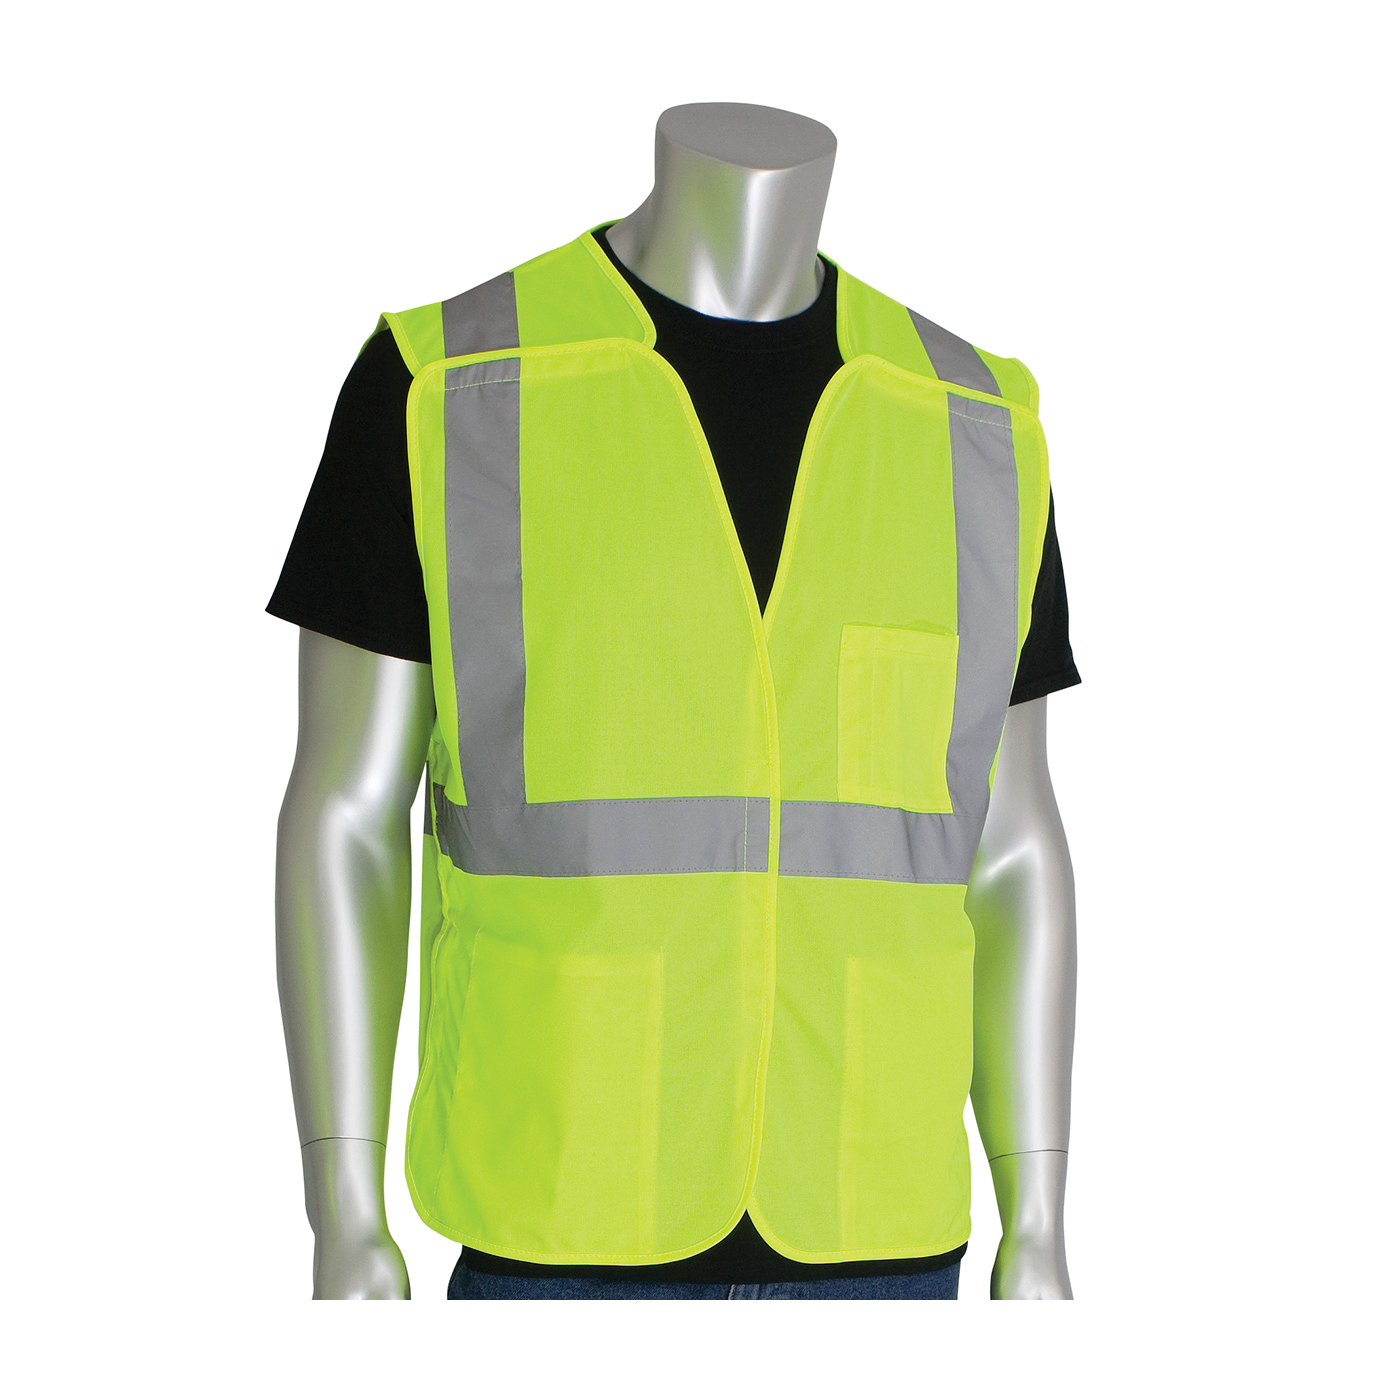 PIP® 302-5PVLY-XL Safety Vest, XL, Hi-Viz Lime Yellow, Polyester, Hook and Loop Closure, 3 Pockets, ANSI Class: Class 2, Specifications Met: ANSI 107 Type R